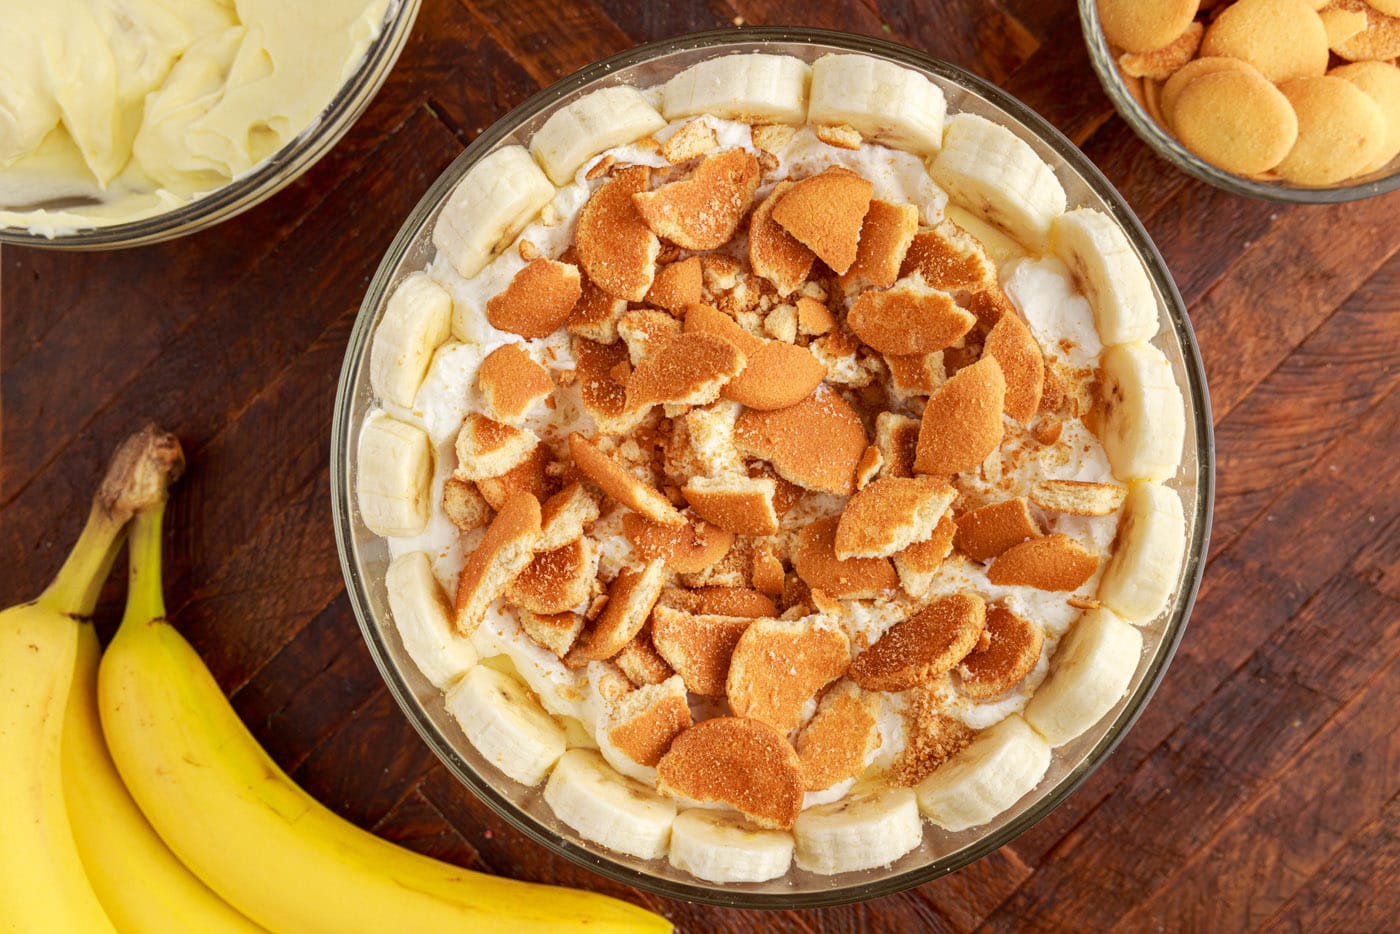 adding a ring of sliced bananas around the trifle bowl